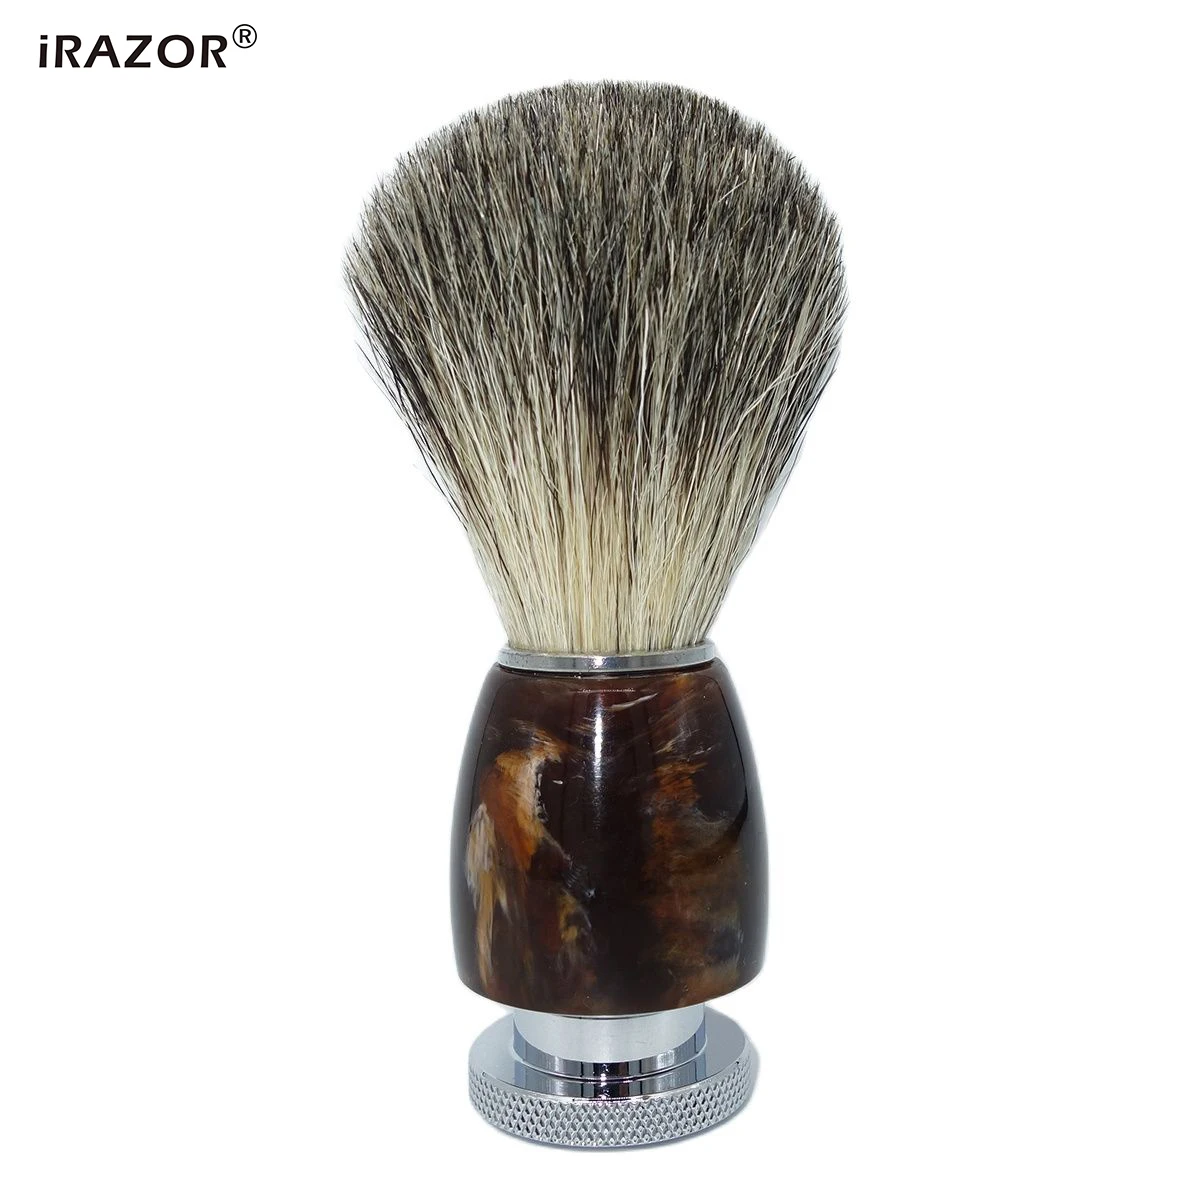 

New Professional Soft Badger Hair Resin Handle Barber Face Beard Cleaning Shaving Brush Tool for Husband Father's Day Gift